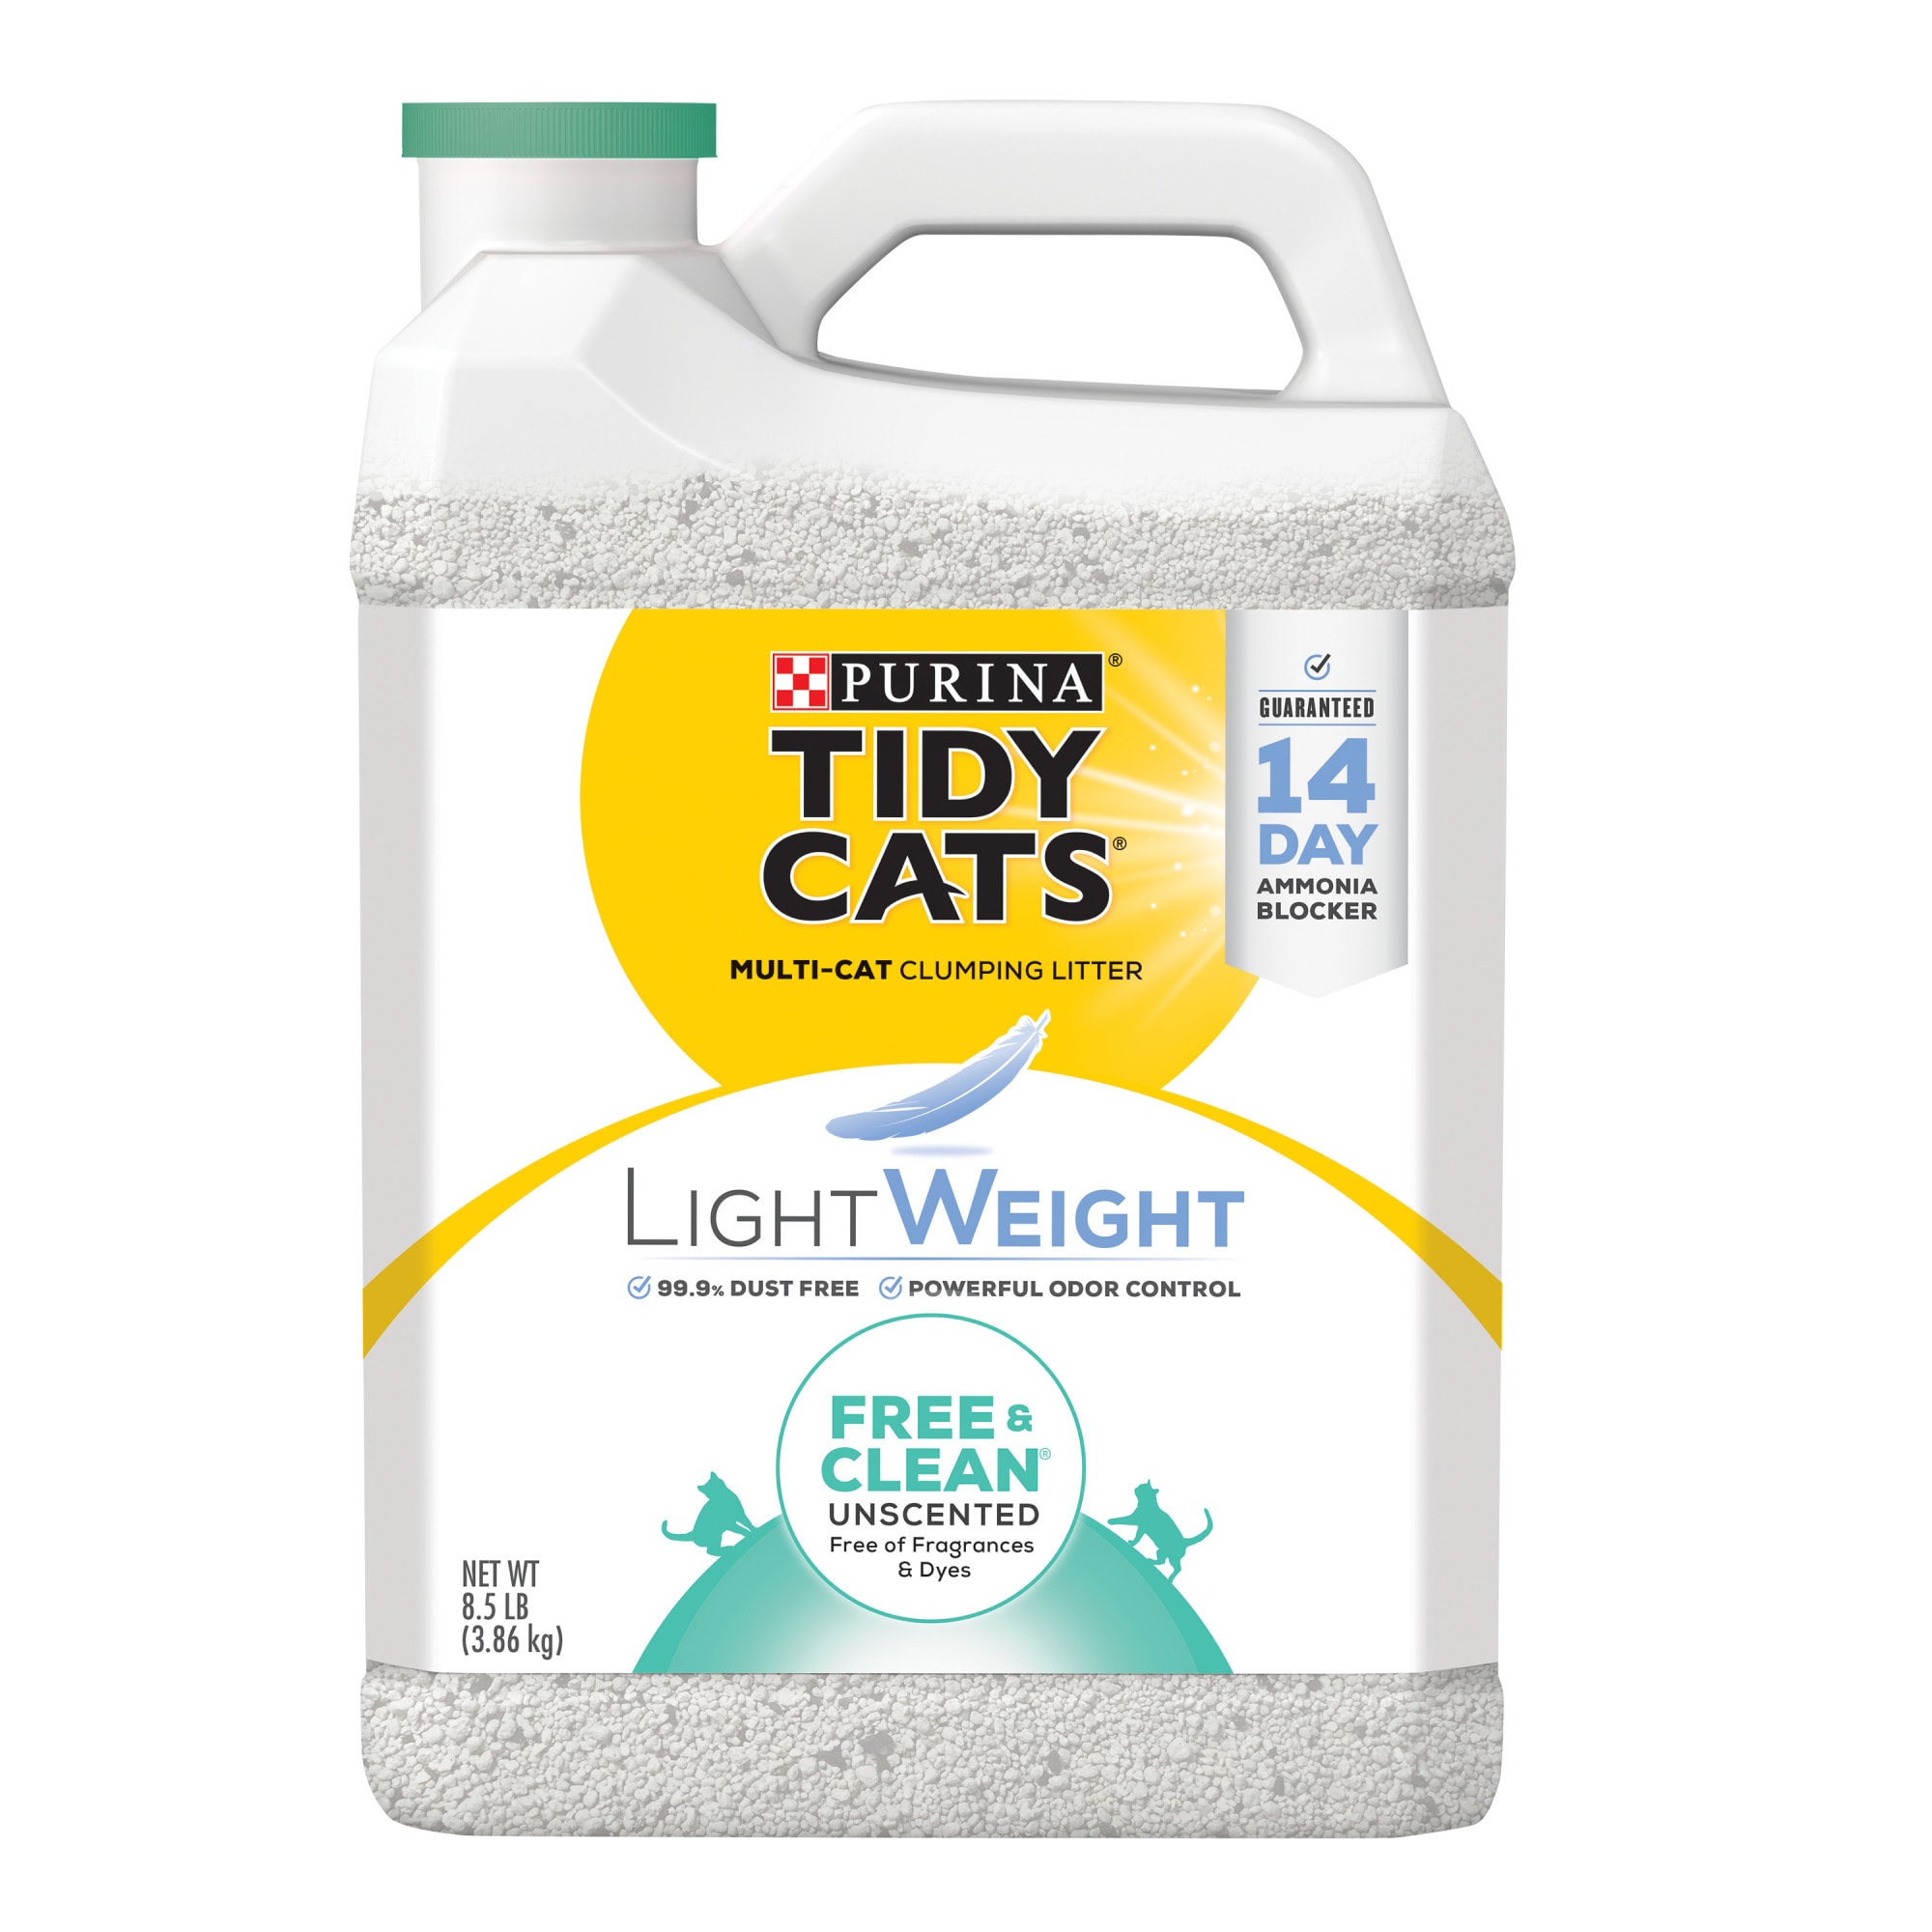 Tidy Cats LightWeight Free & Clean Unscented Dust Free Clumping Multi